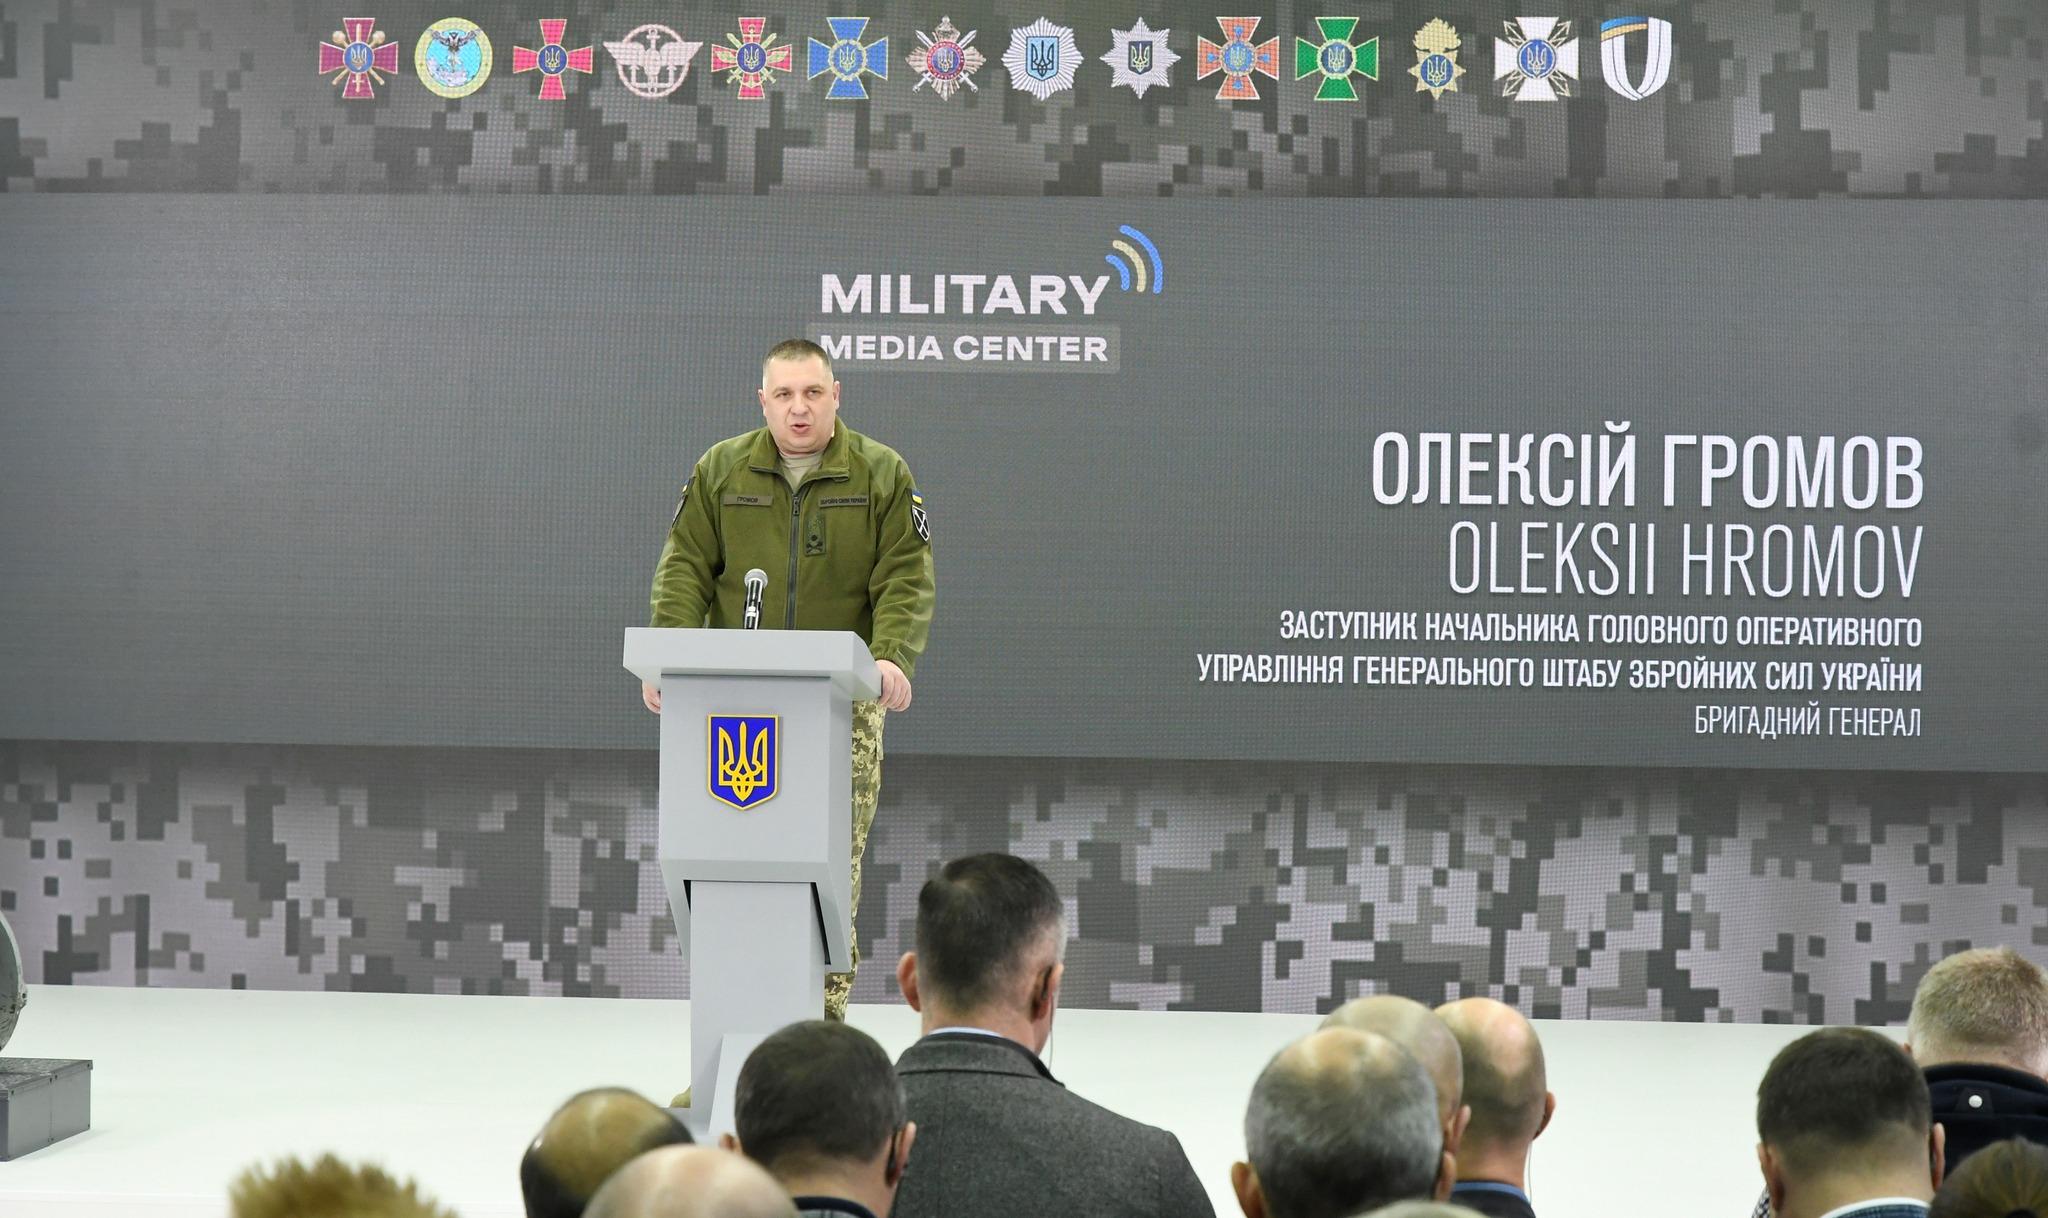 Oleksii Hromov: Ukraine and its allies must not underestimate Russian force generation capabilities in the long run for a protracted war of attrition